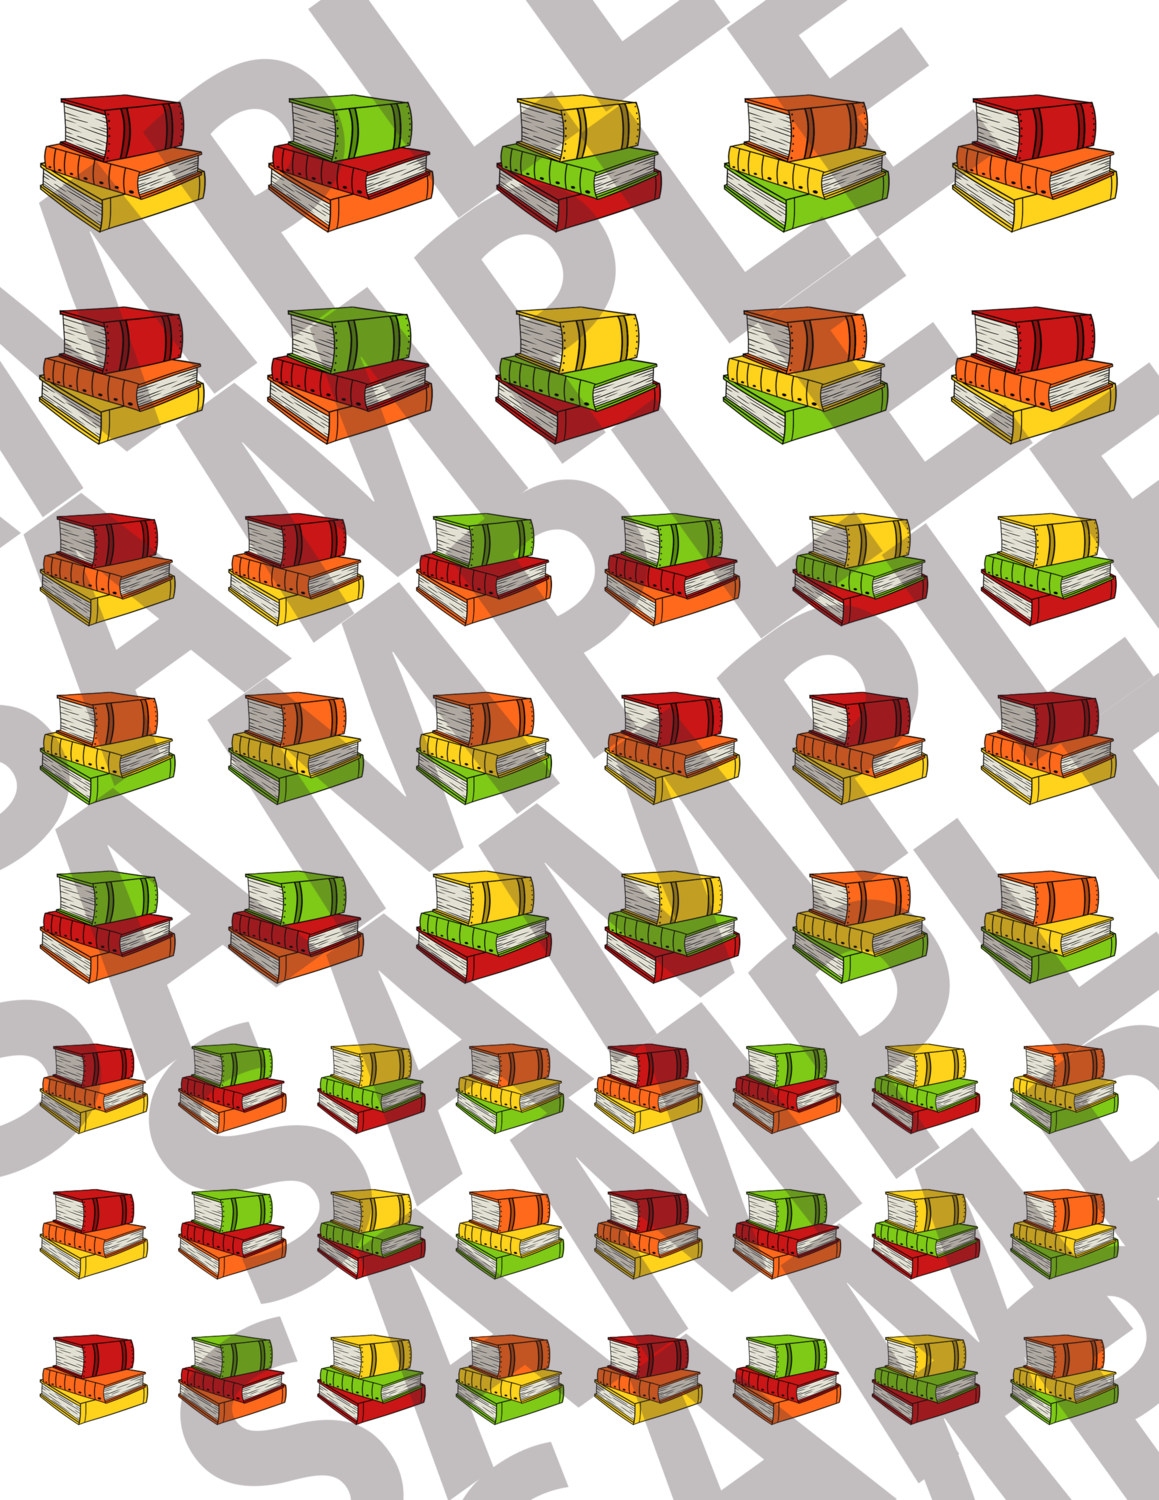 Apples & Oranges - Stacked Books Punchables